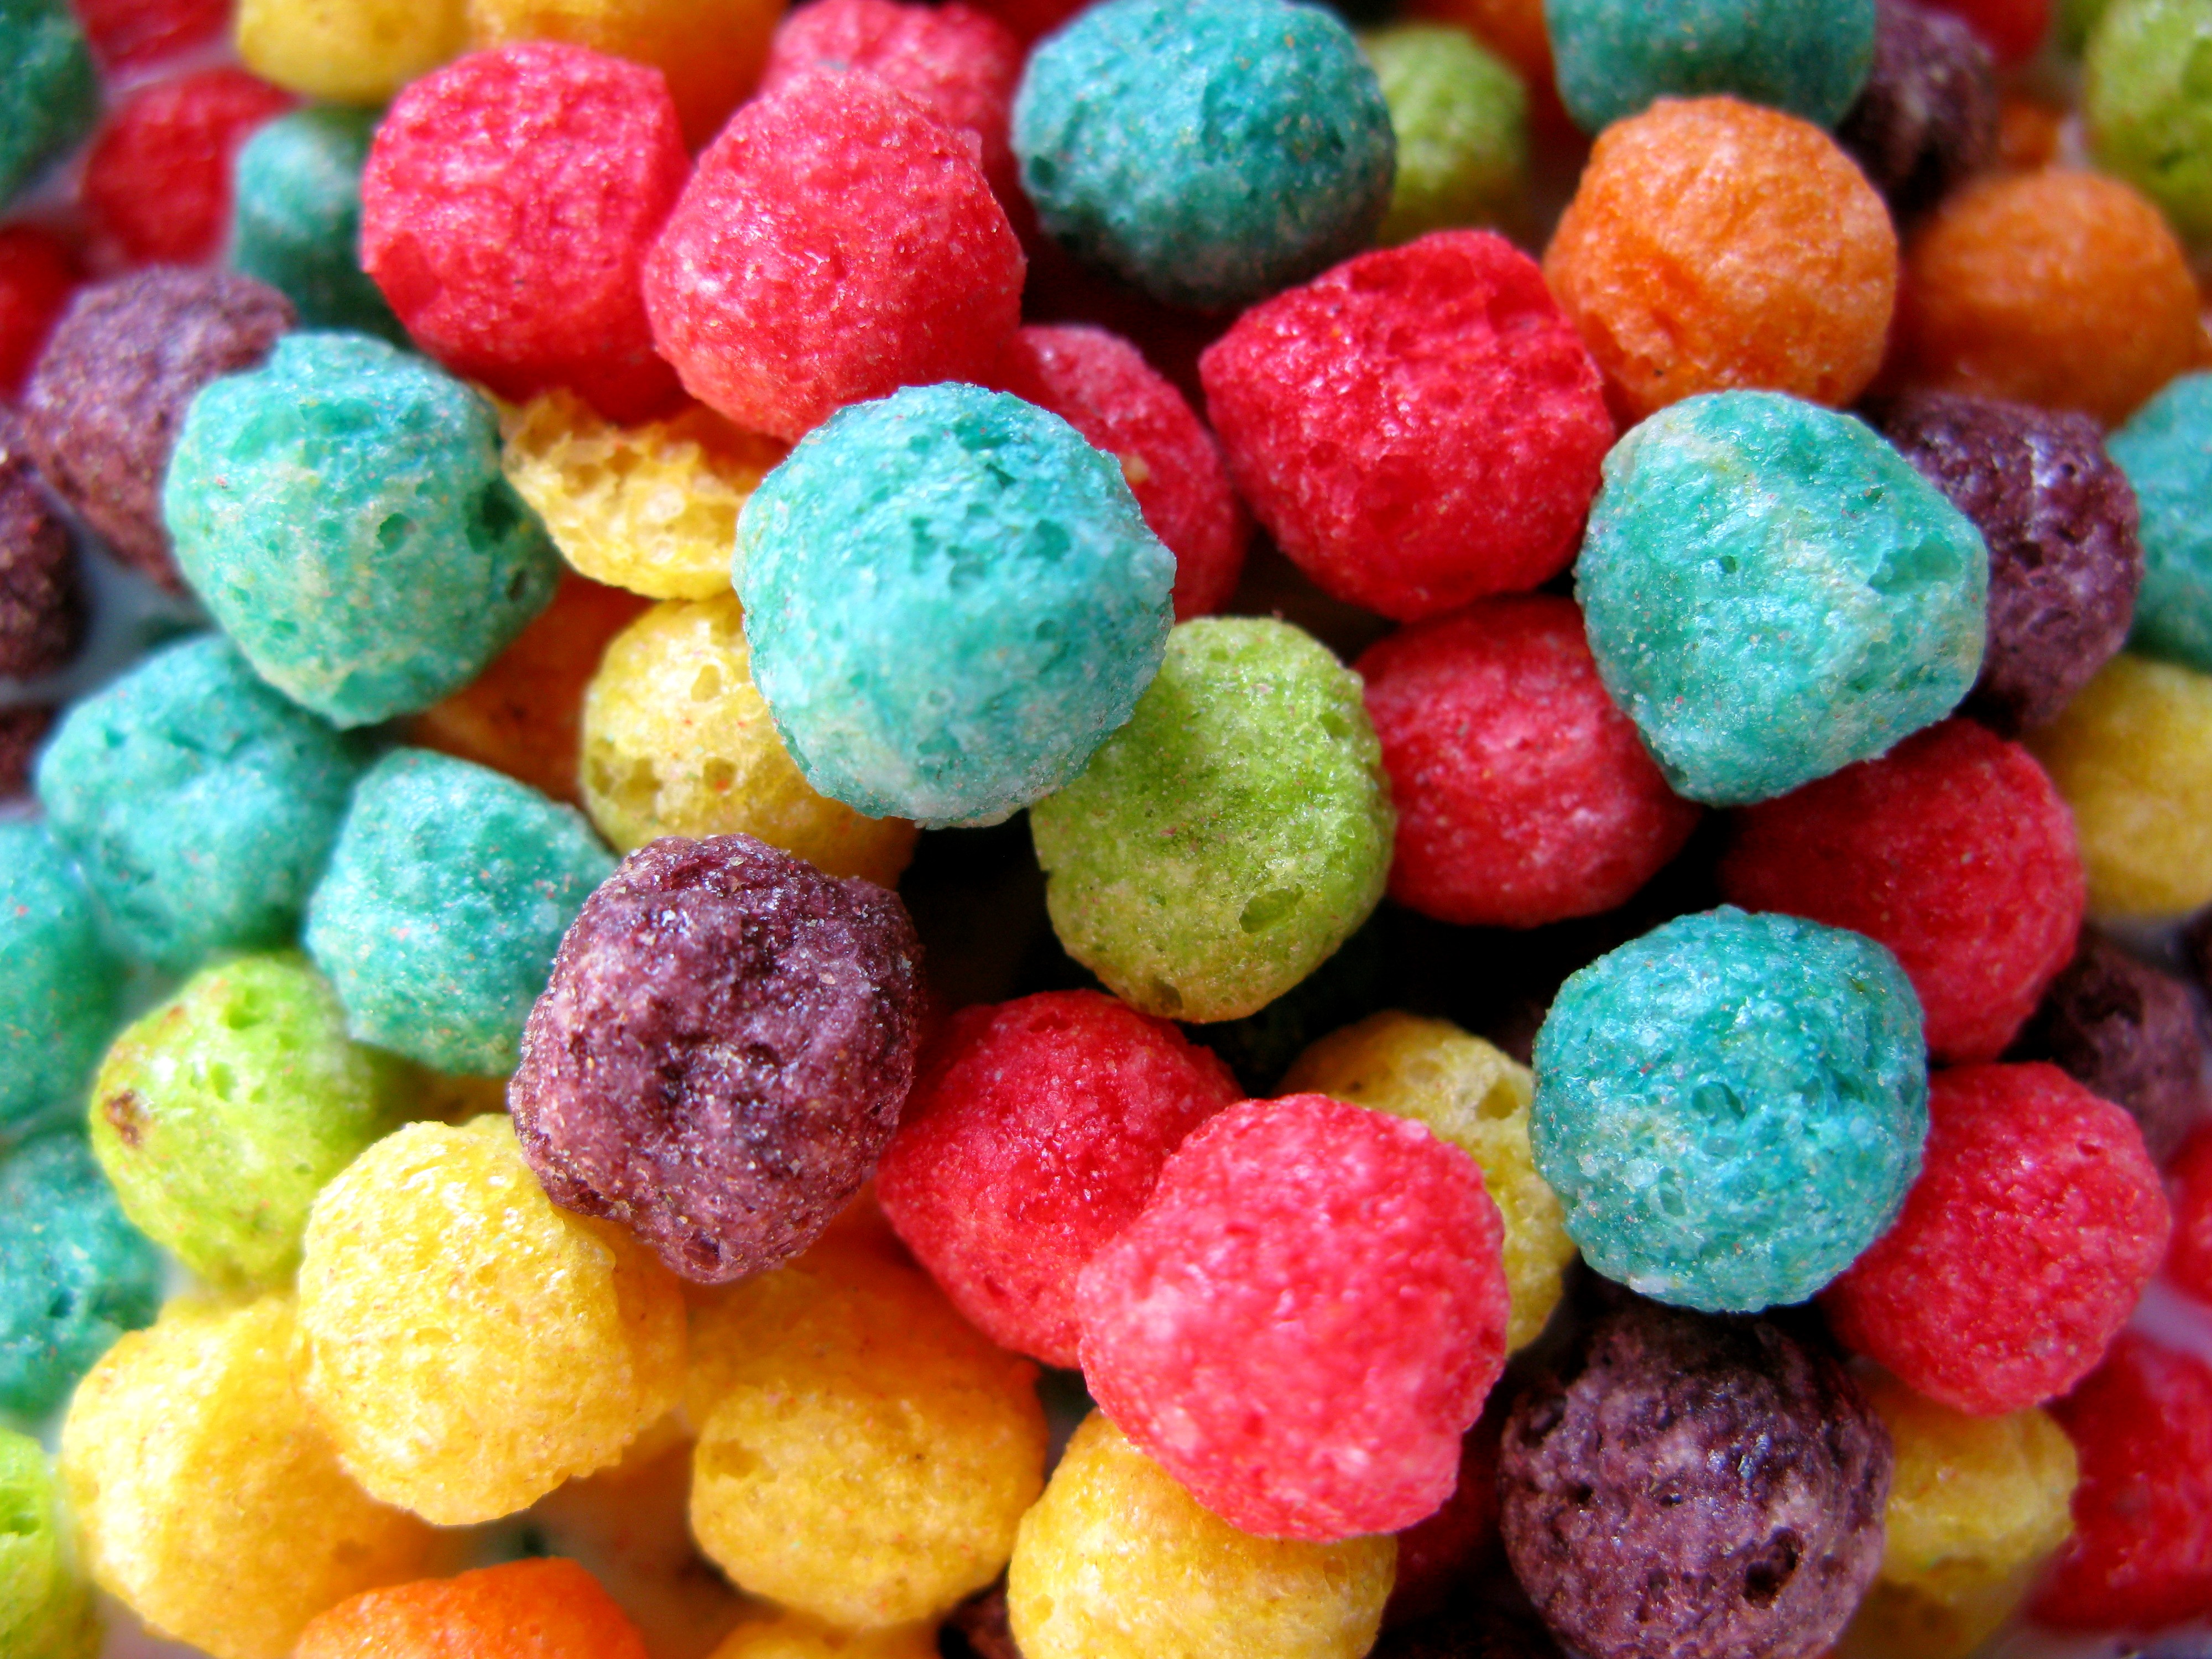 10 Kinds Of Cereal All '80s And '90s Kids Were So Obsessed With